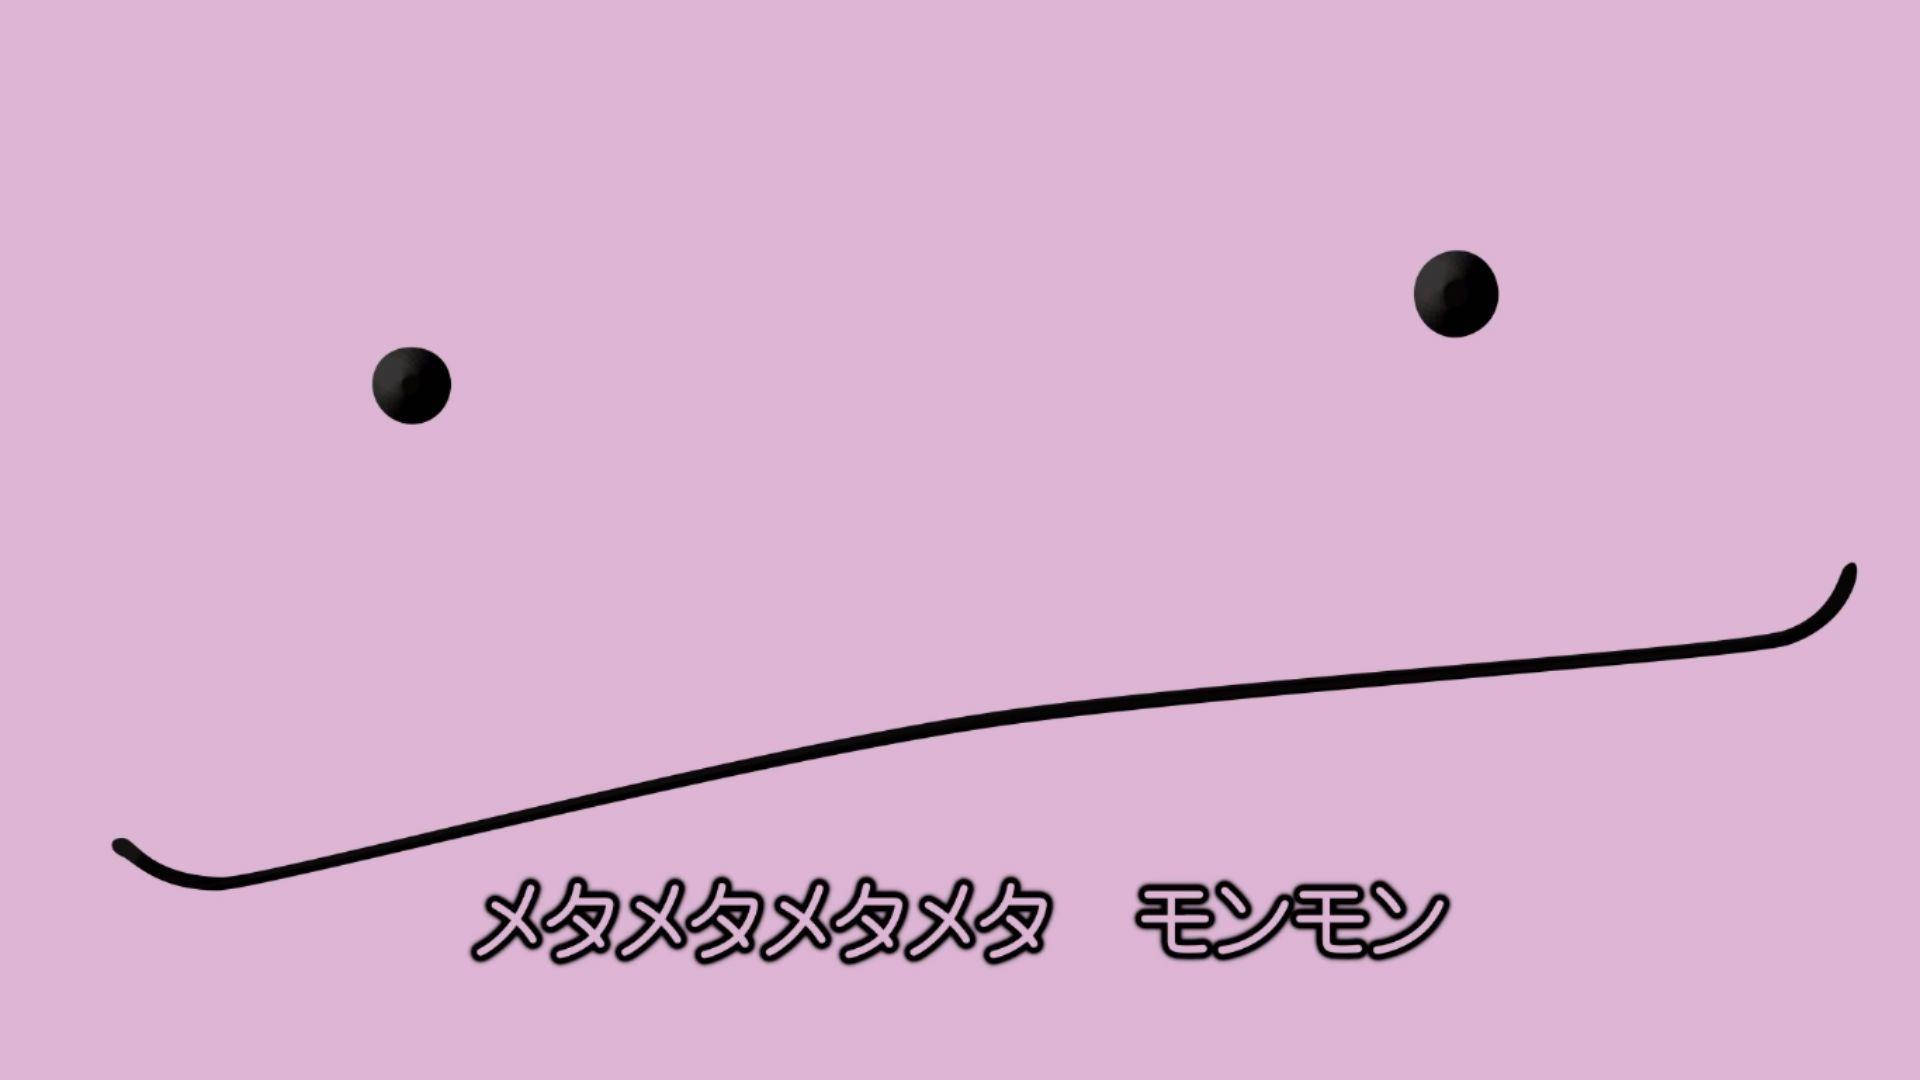 Ditto With Japanese Subtitles